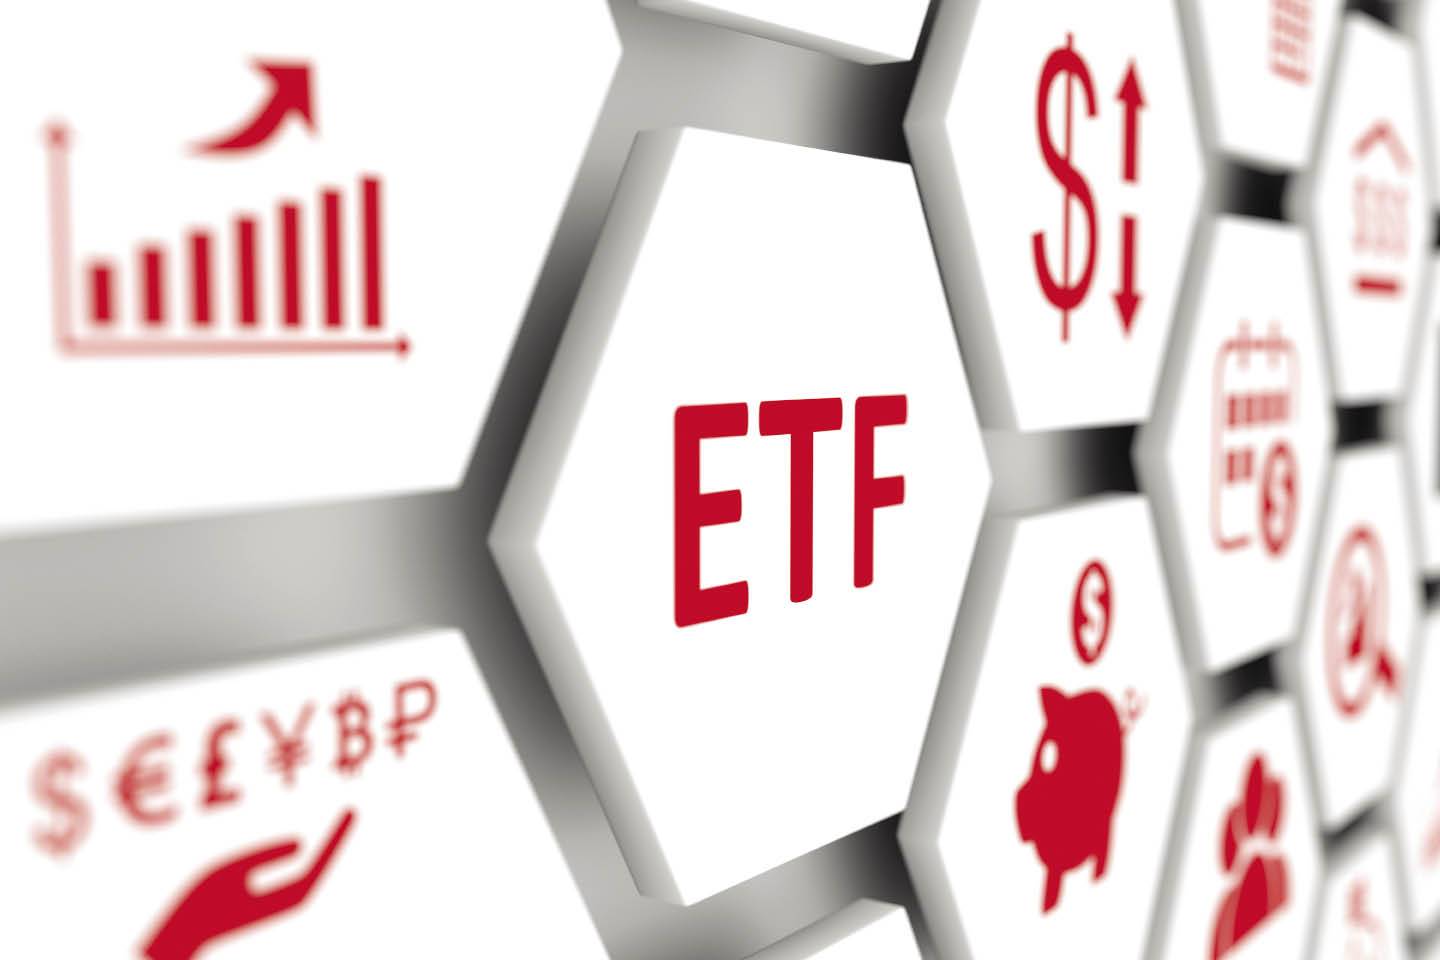 The FSCA has approved amendments to the JSE Listings Requirements that will pave a way for companies to list actively managed ETFs.